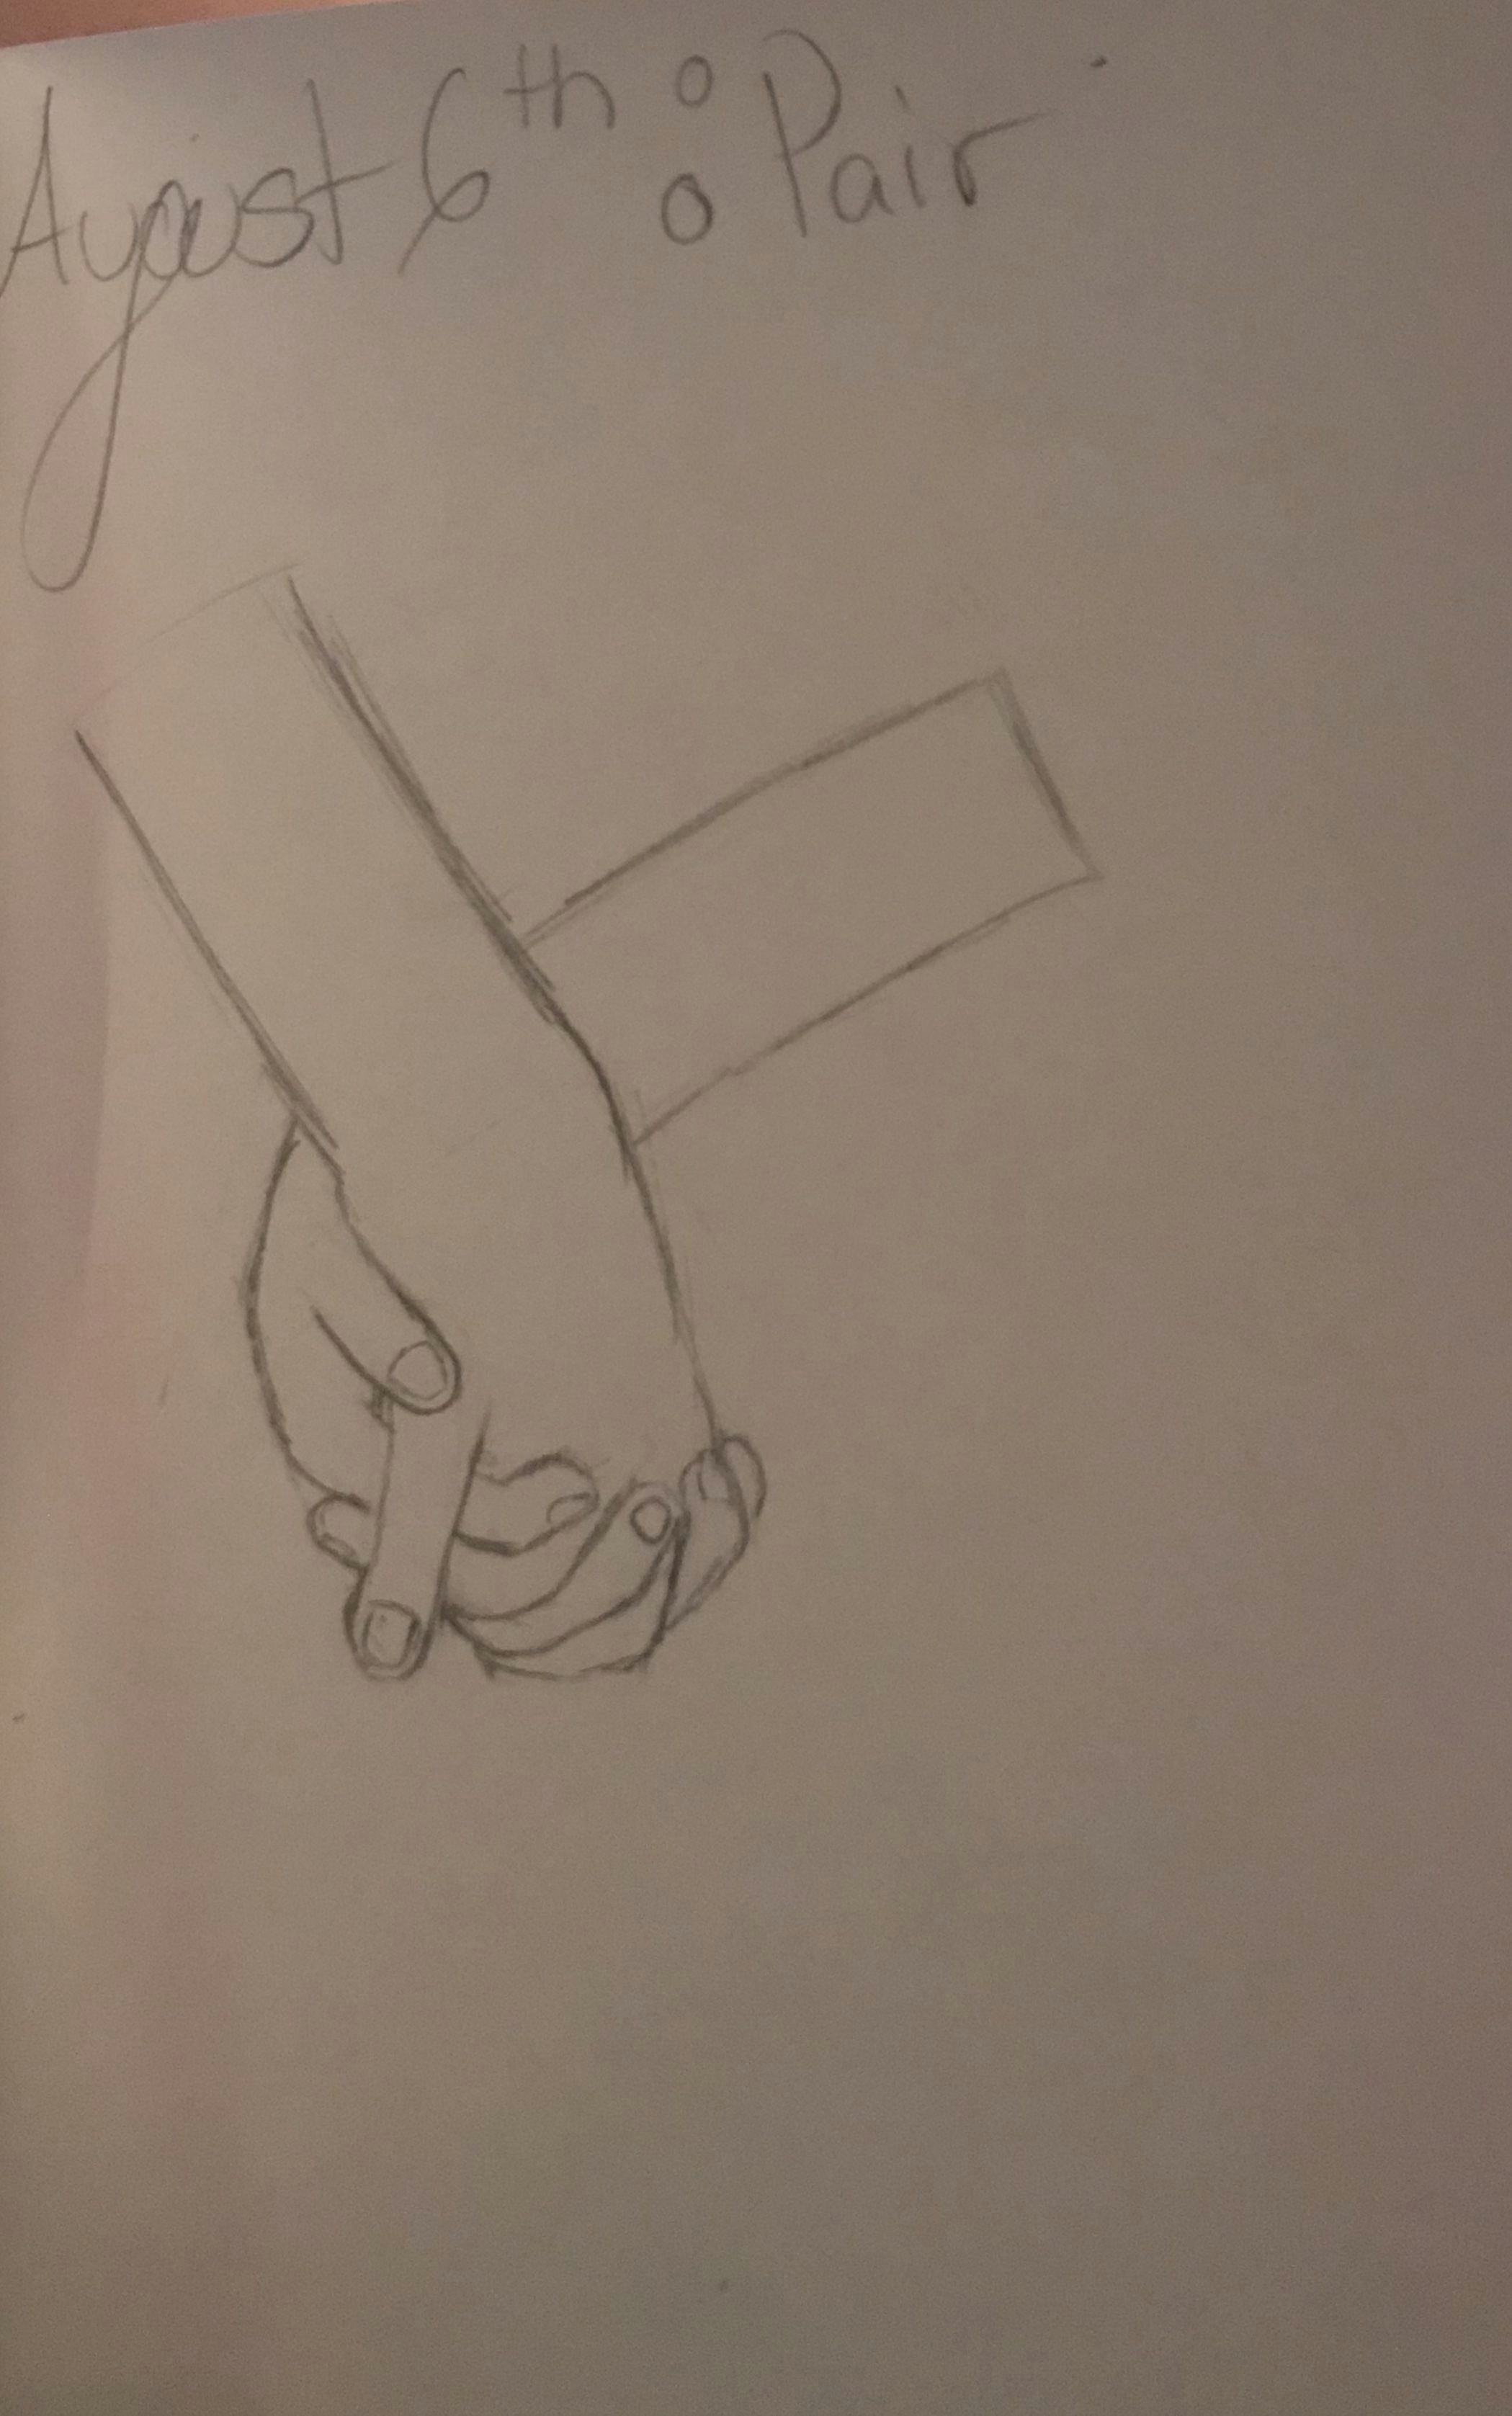 Drawing Hands is Hard August Drawing Challenge August 6th Pair This is Actually My